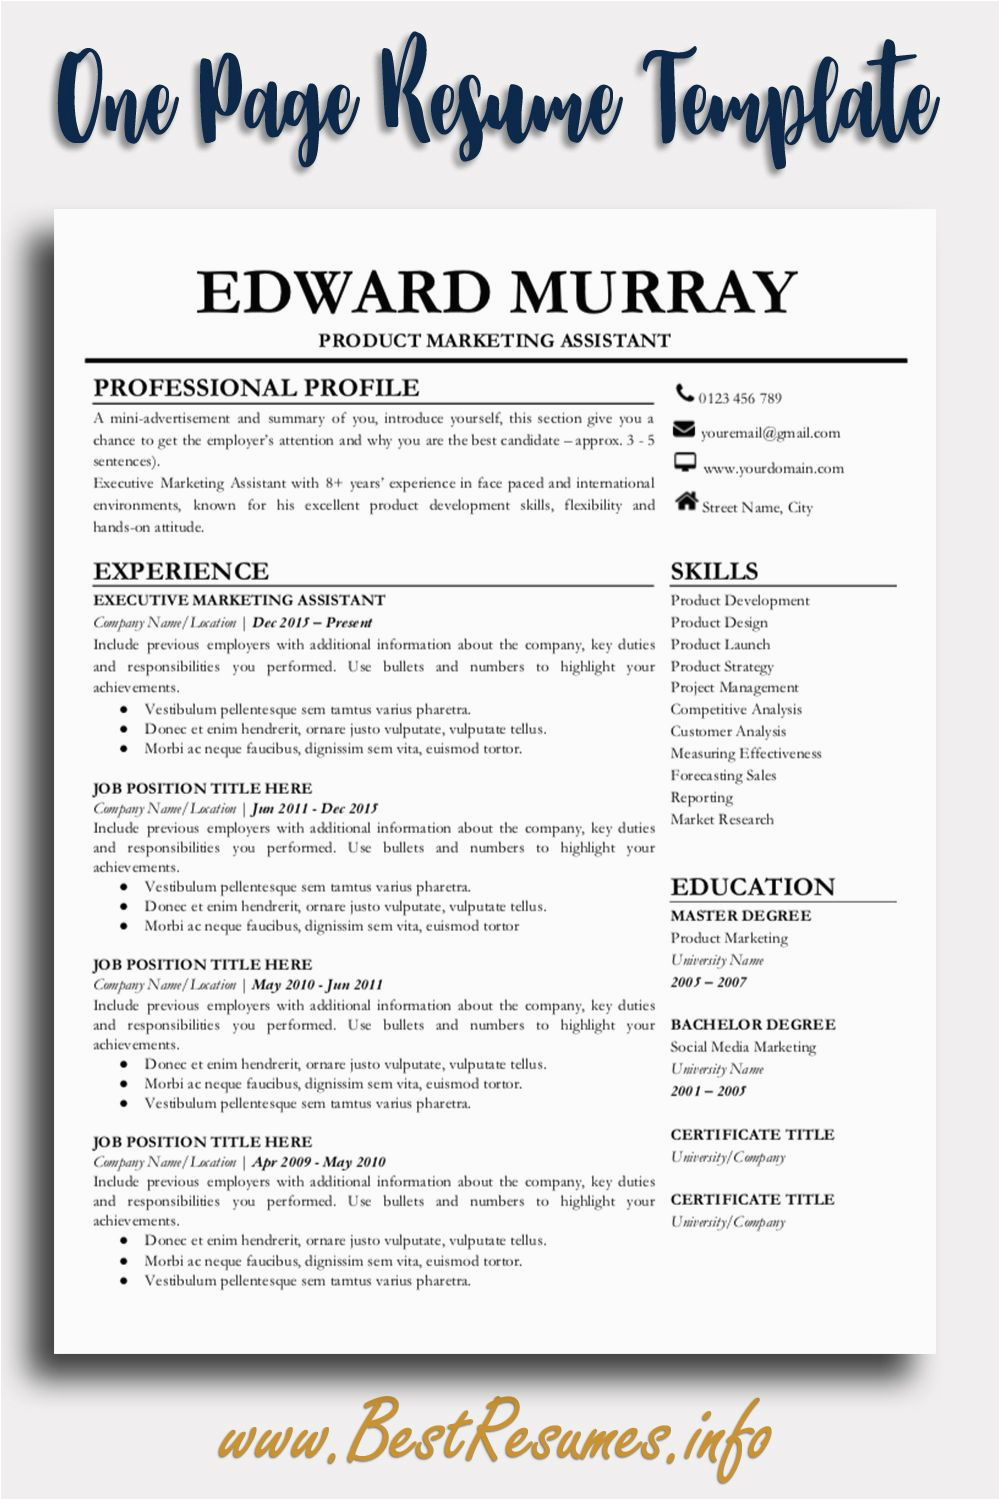 Best Template to Use for Resume Best Teacher Resume Templates Professional Resume